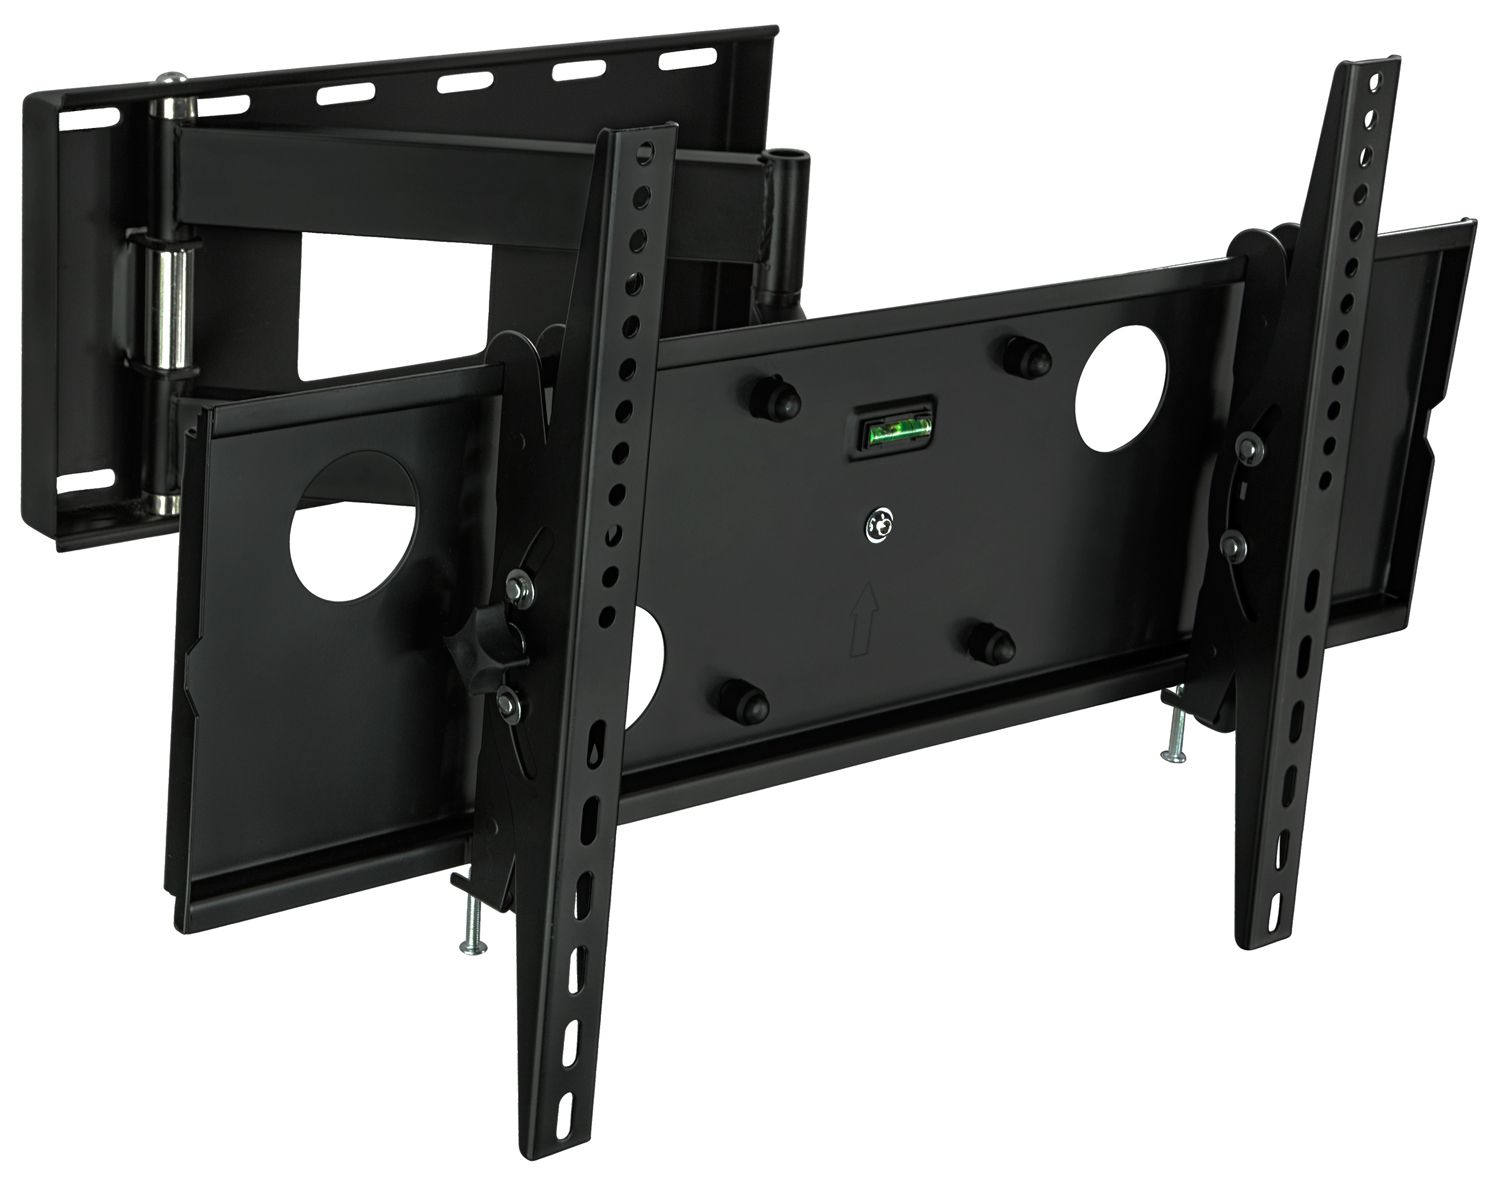 Mount It! Full Motion Tv Wall Mount | Fits 50" 65" Tvs Pertaining To Wall Mounted Tv Stands For Flat Screens (View 1 of 15)